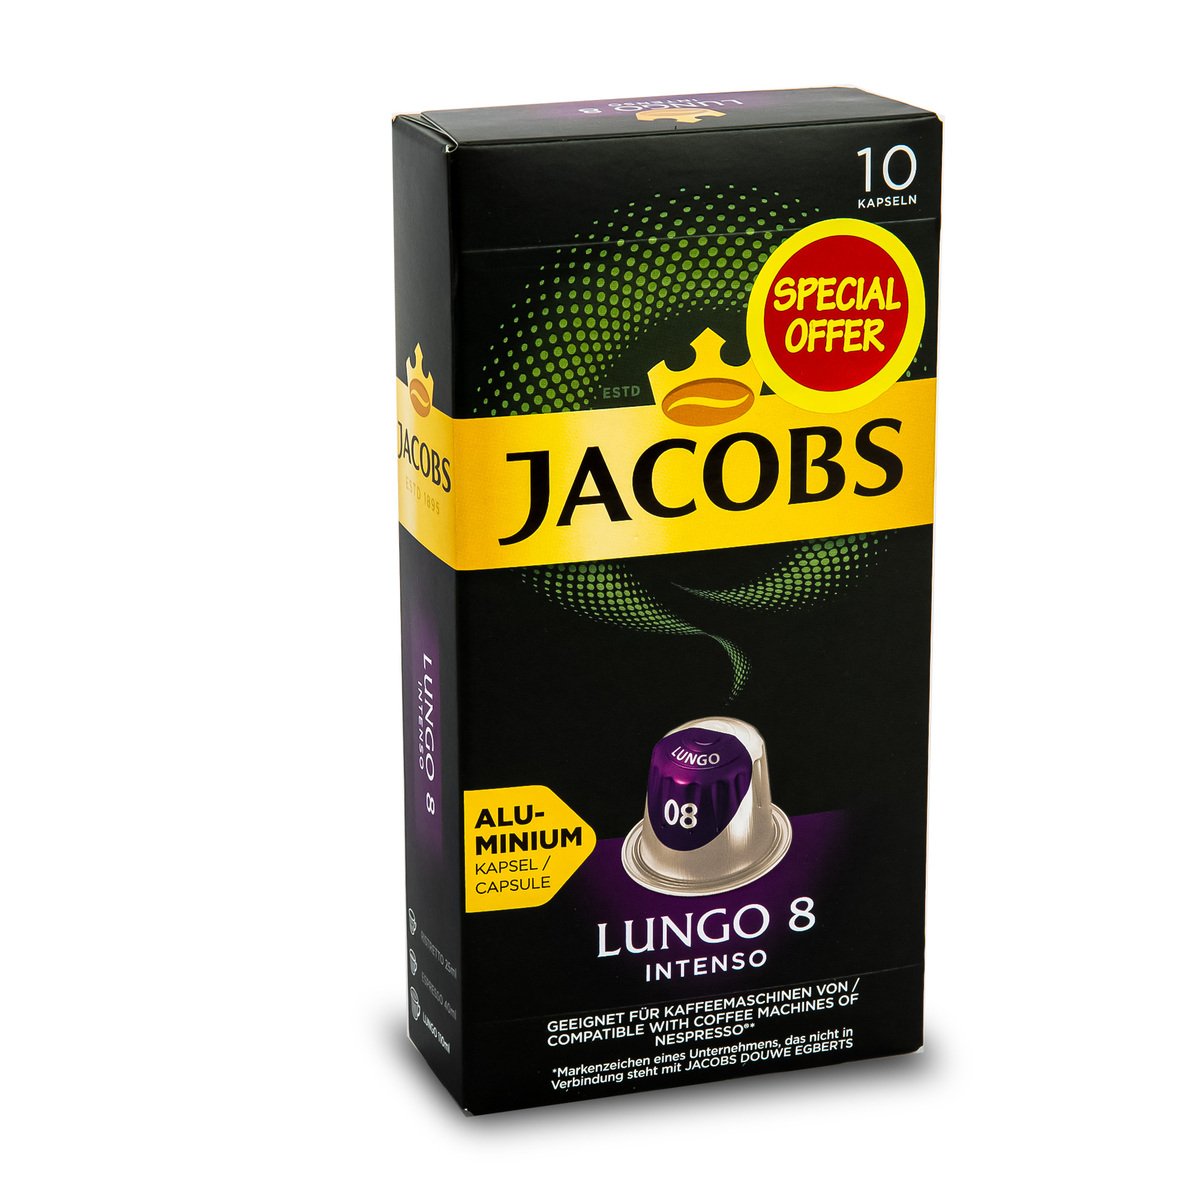 Jacobs Lungo 8 Intenso Value Pack 10 pcs